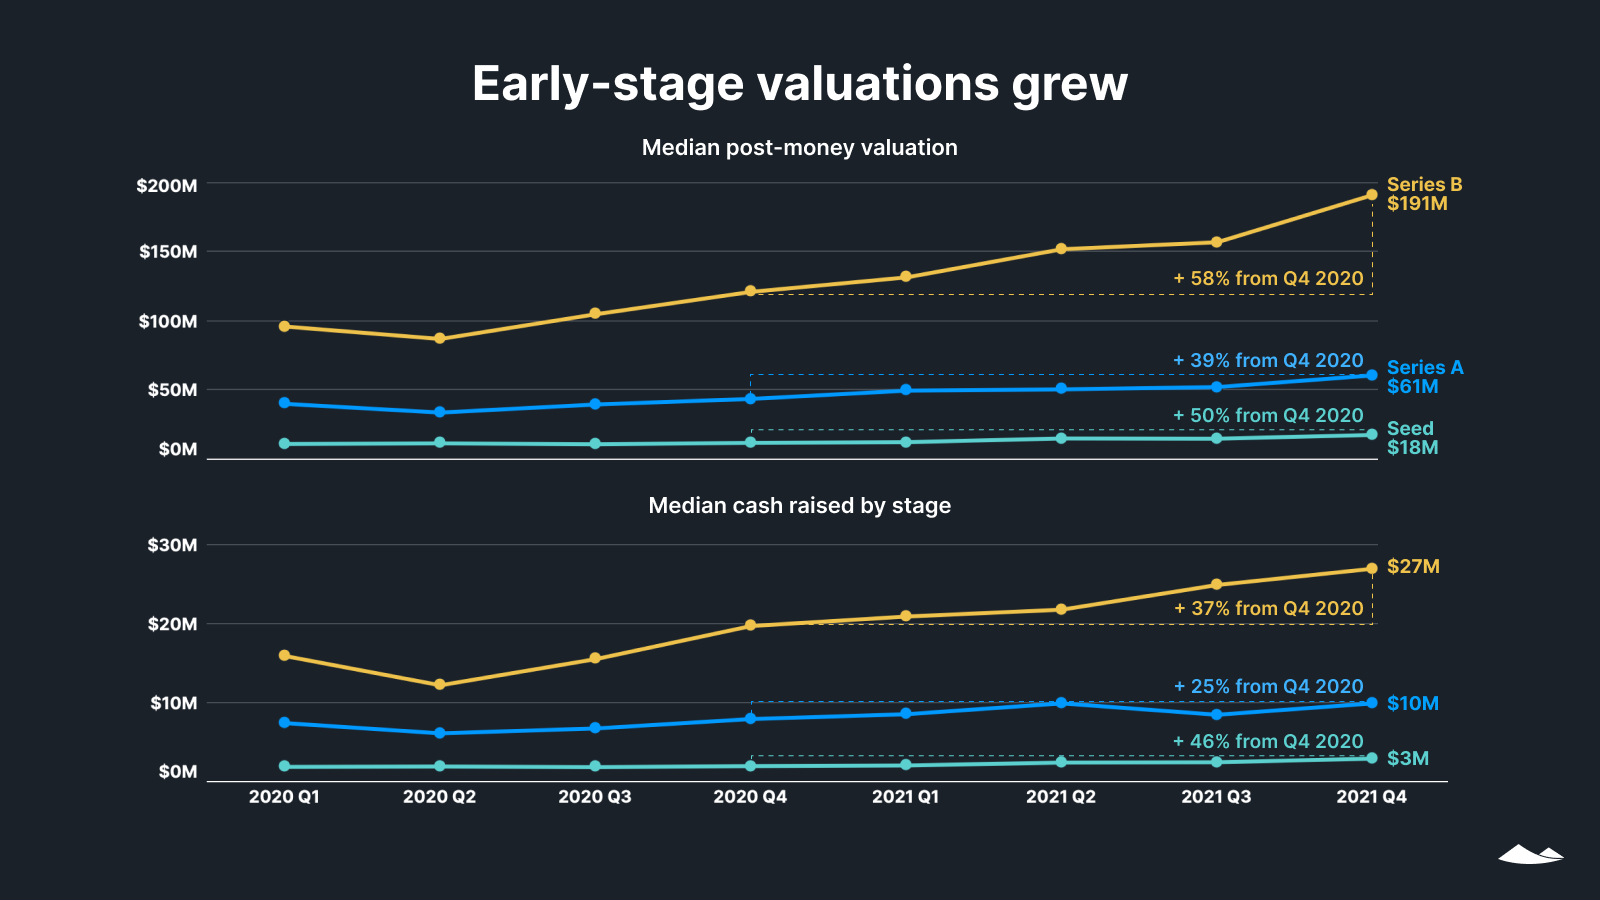 Early stage valuations grew